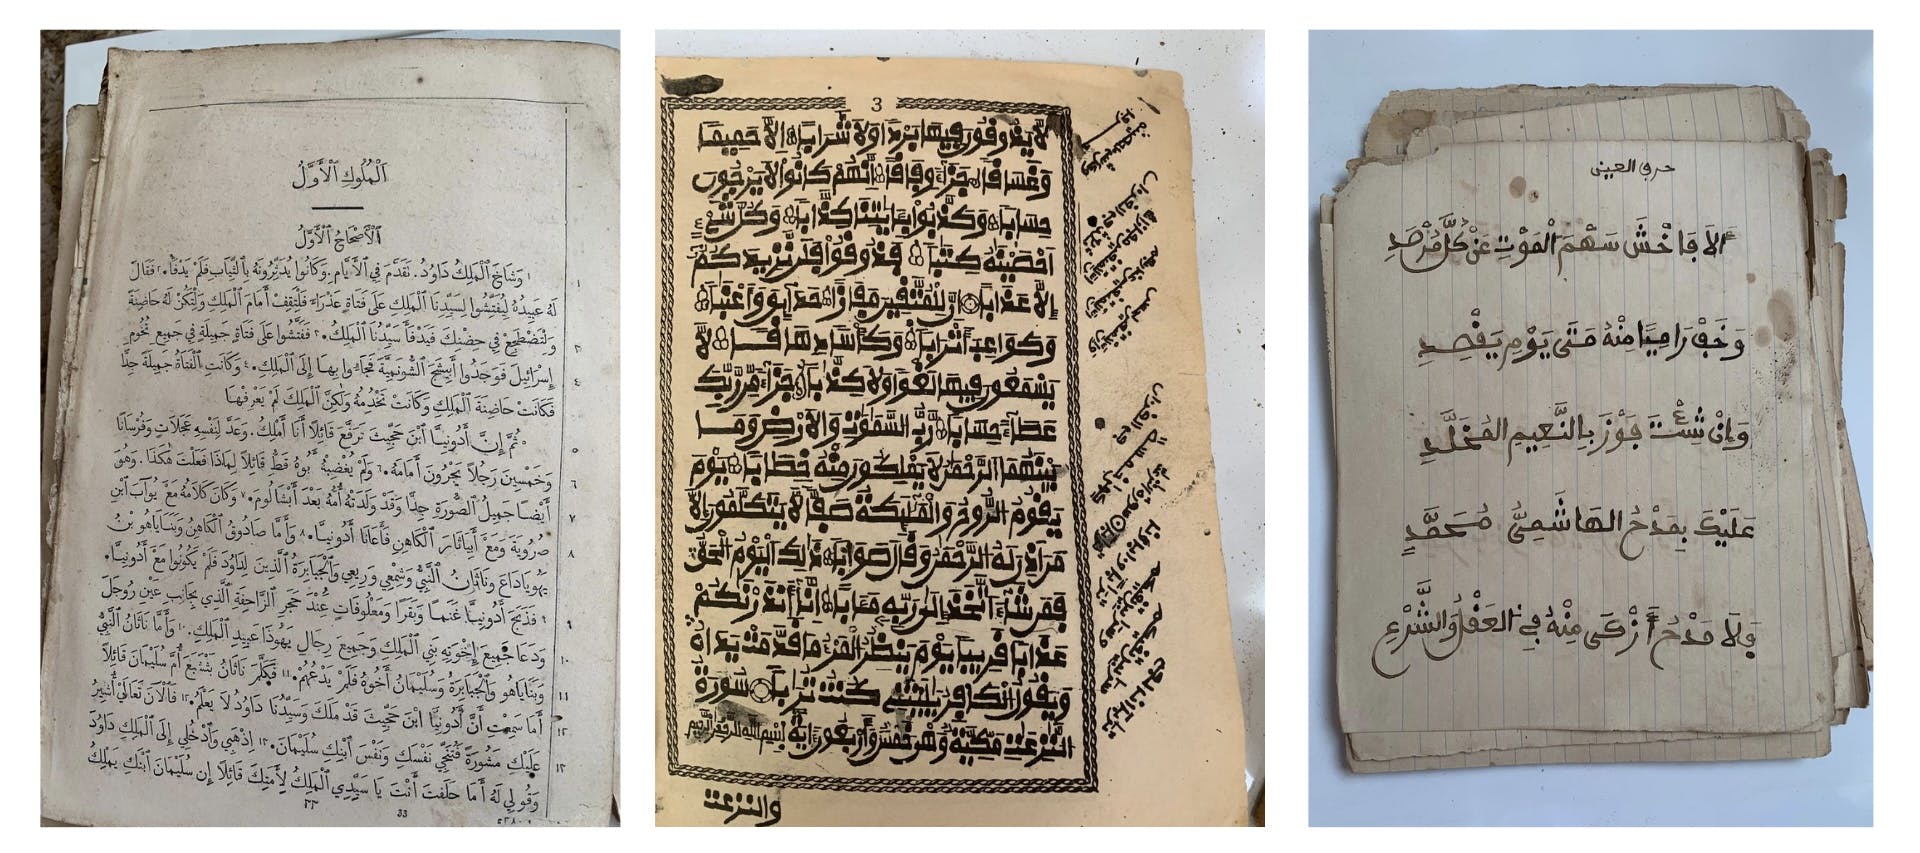 Pictured from left to right: Old Testament: Book of Jeremiah, A Holy Quran, Ishriniyyat Al Fazzazi ( A praise poem of The Prophet Muhammad Pbuh. 